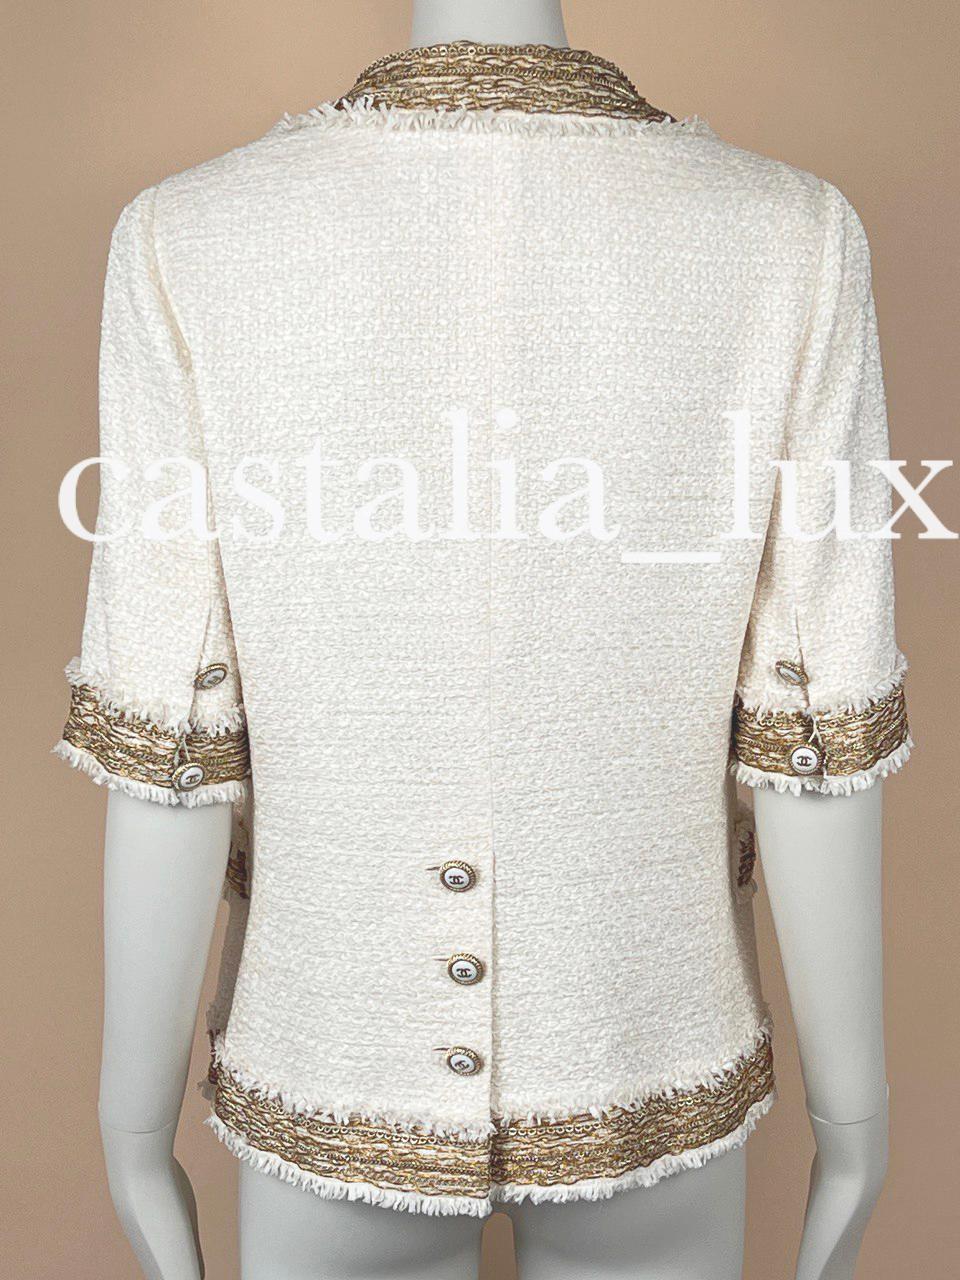 Chanel Extremely Rare Chain Accents Jacket from Ad Campaign For Sale 9